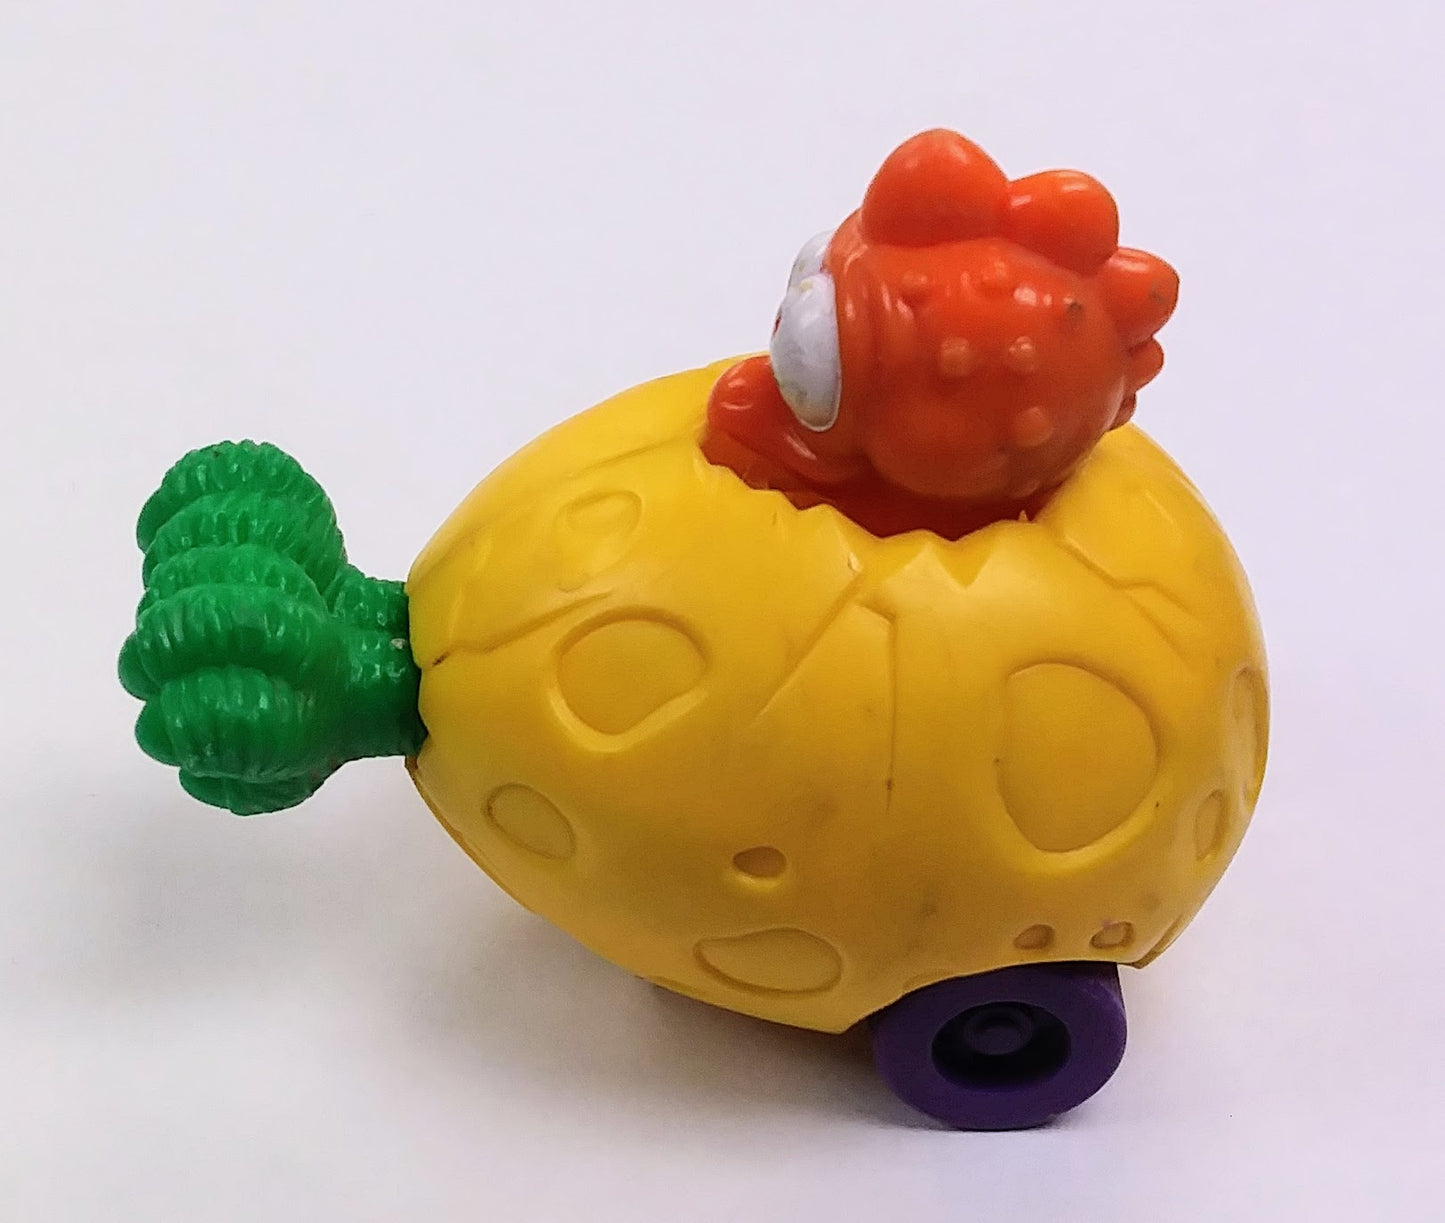 Wendy's Kids Meal toy - Surprize Egg Dinosaur